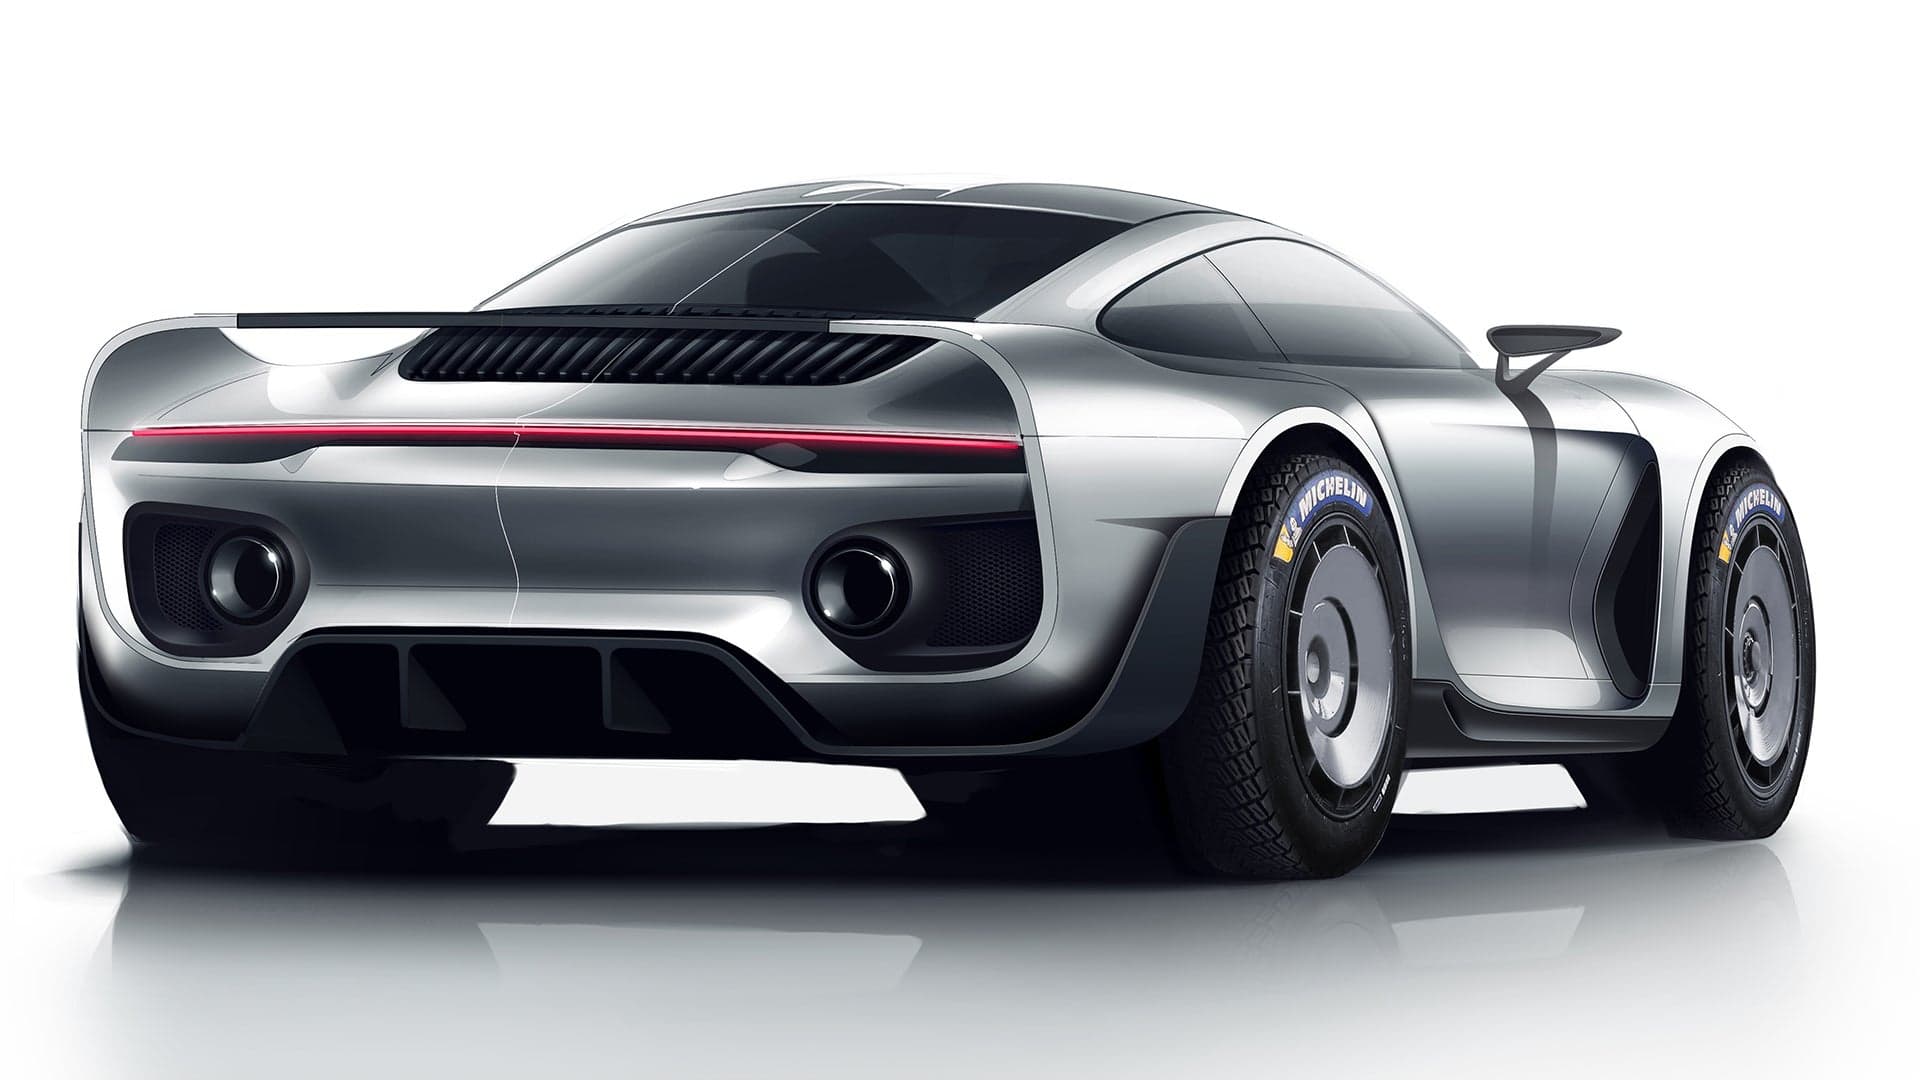 New Porsche 911-Based Off-Roader by Uwe Gemballa’s Son Will Pack a 750-HP Flat-Six by Ruf